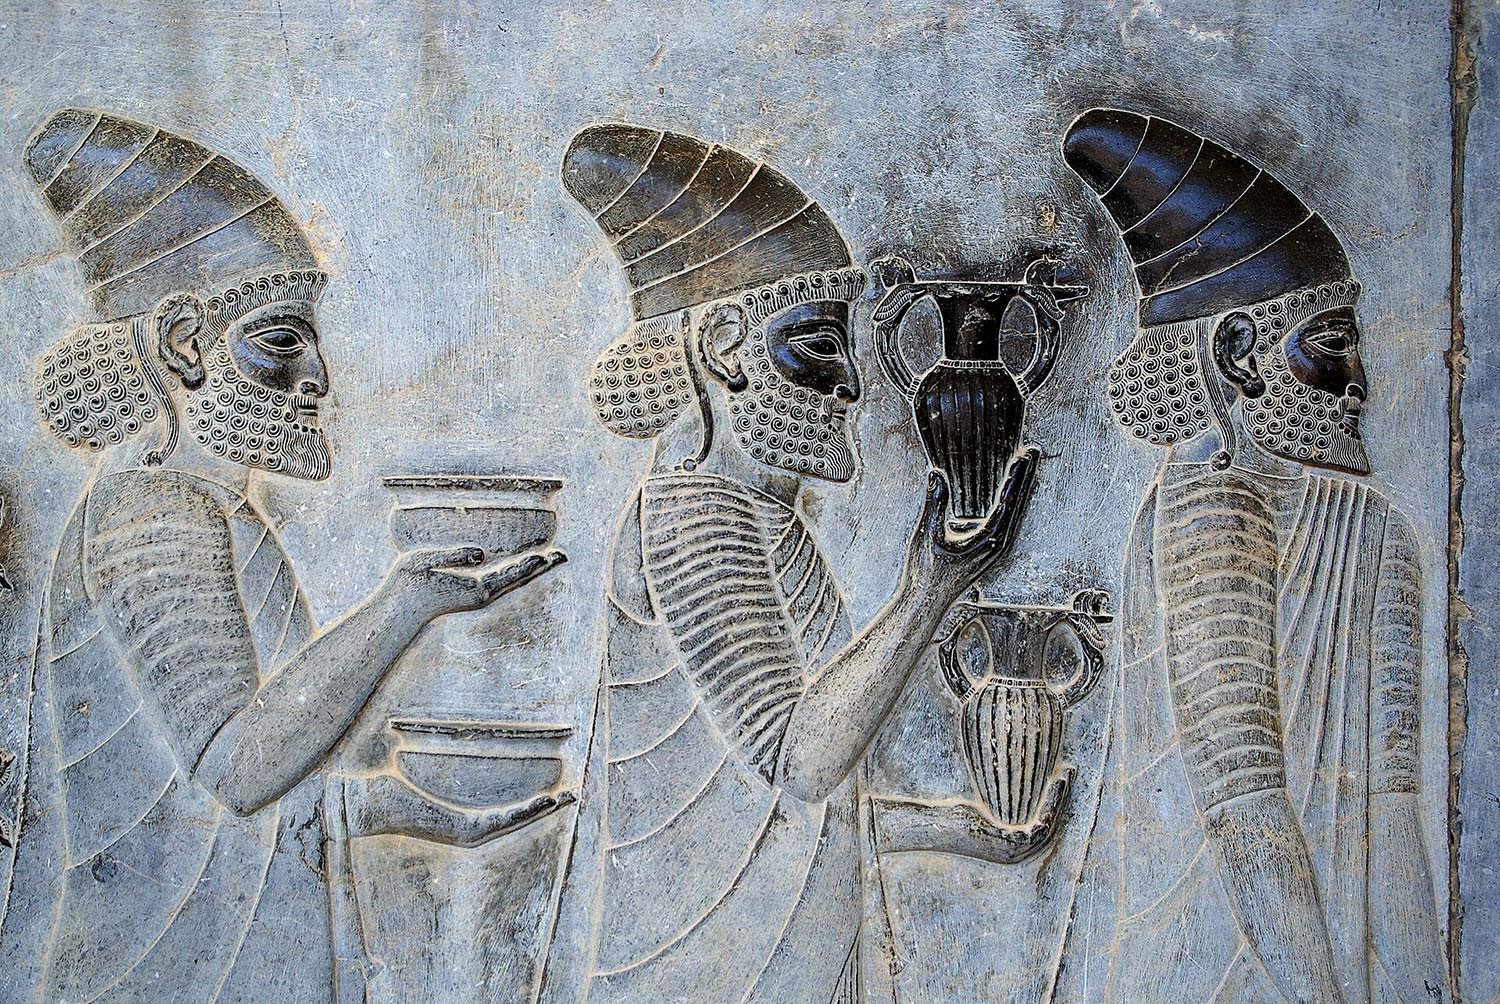 Detail Of A Relief On The Eastern Stairs Of The Apadana Palace, Persepolis, Depicting Armenian Ambassadors, Bringing Wine To The Persian Emperor.